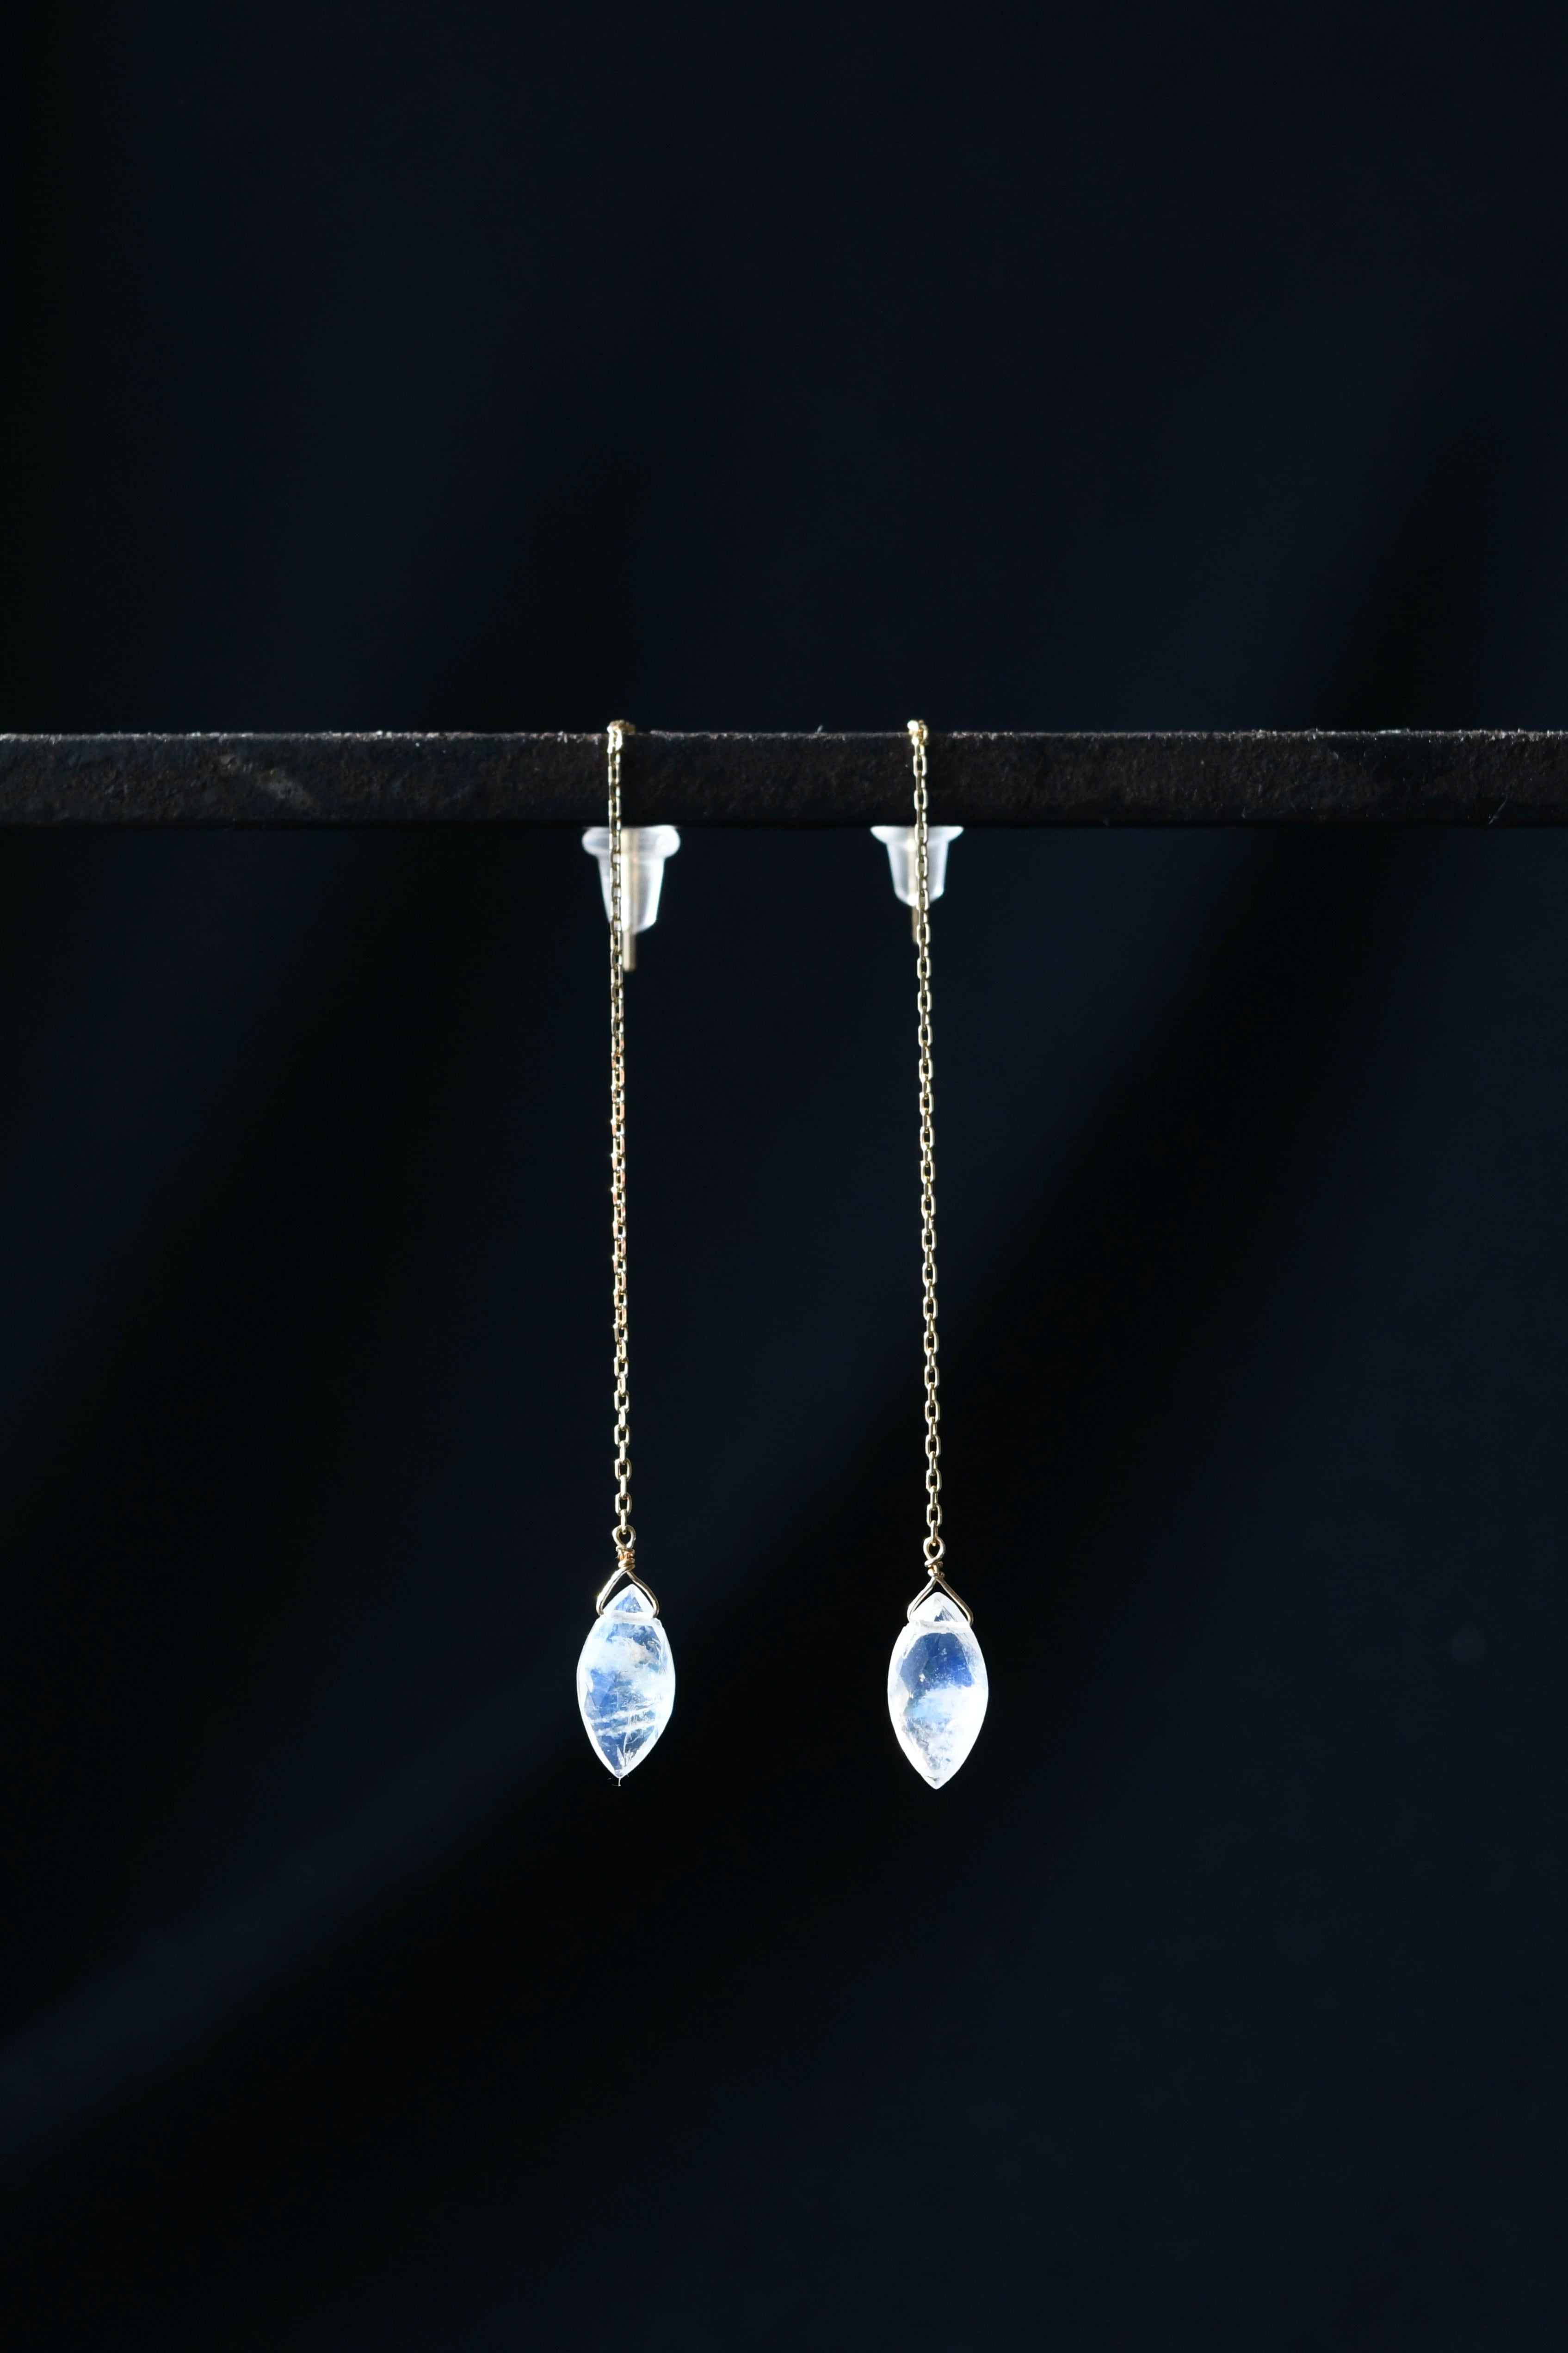 K18 Blue Moonstone Chain Earrings 18金ブルームーンストーンチェーンピアス | quirk of Fate  powered by BASE